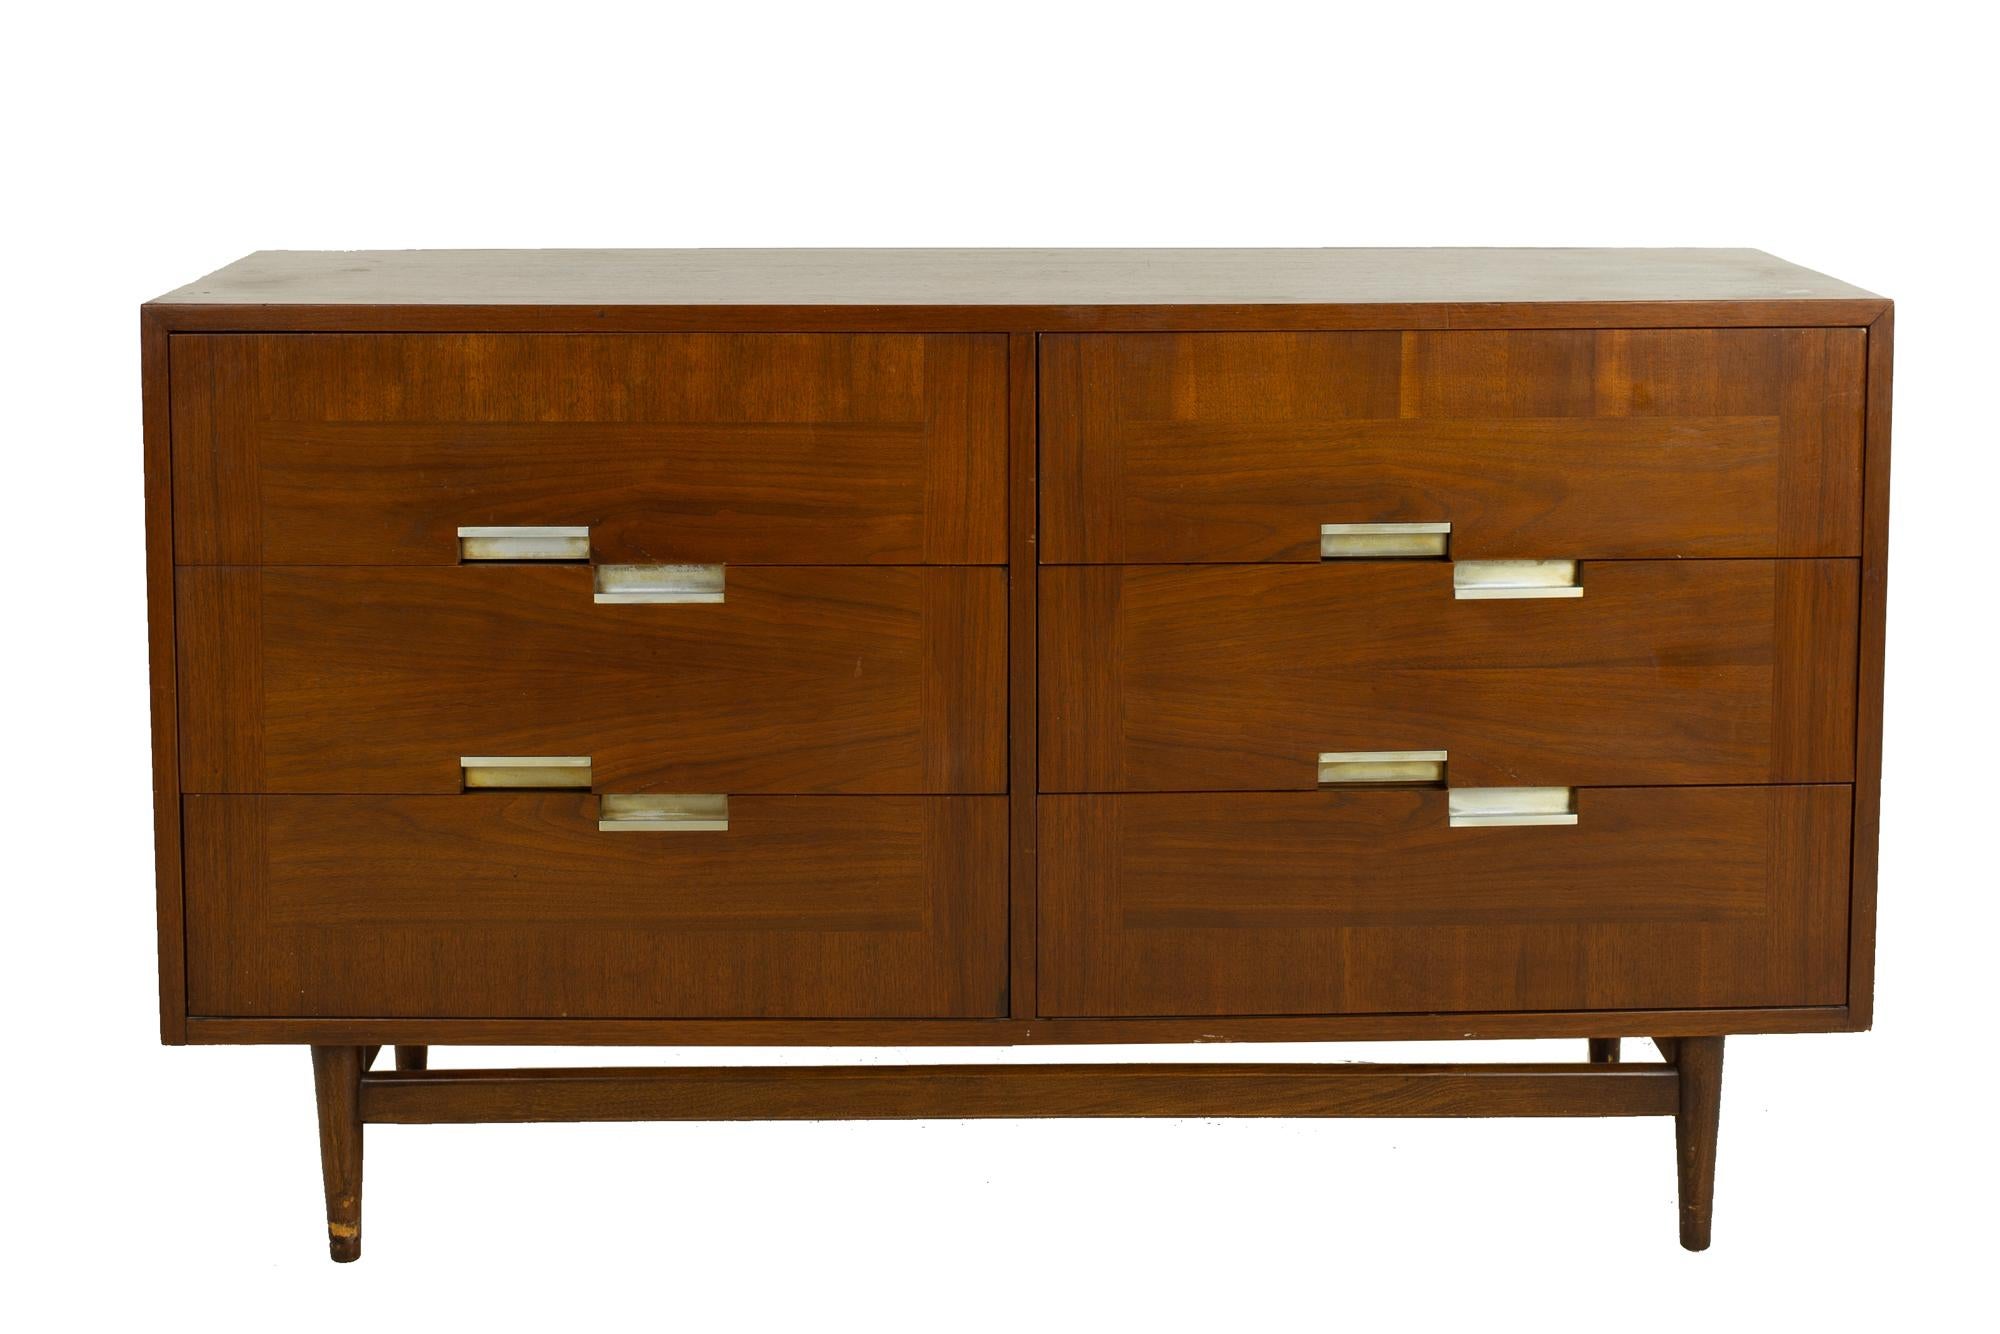 Merton Gershun for American of Martinsville mid century 6 drawer lowboy dresser
Dresser measures: 54 wide x 18.5 deep x 31 inches high

?All pieces of furniture can be had in what we call restored vintage condition. That means the piece is